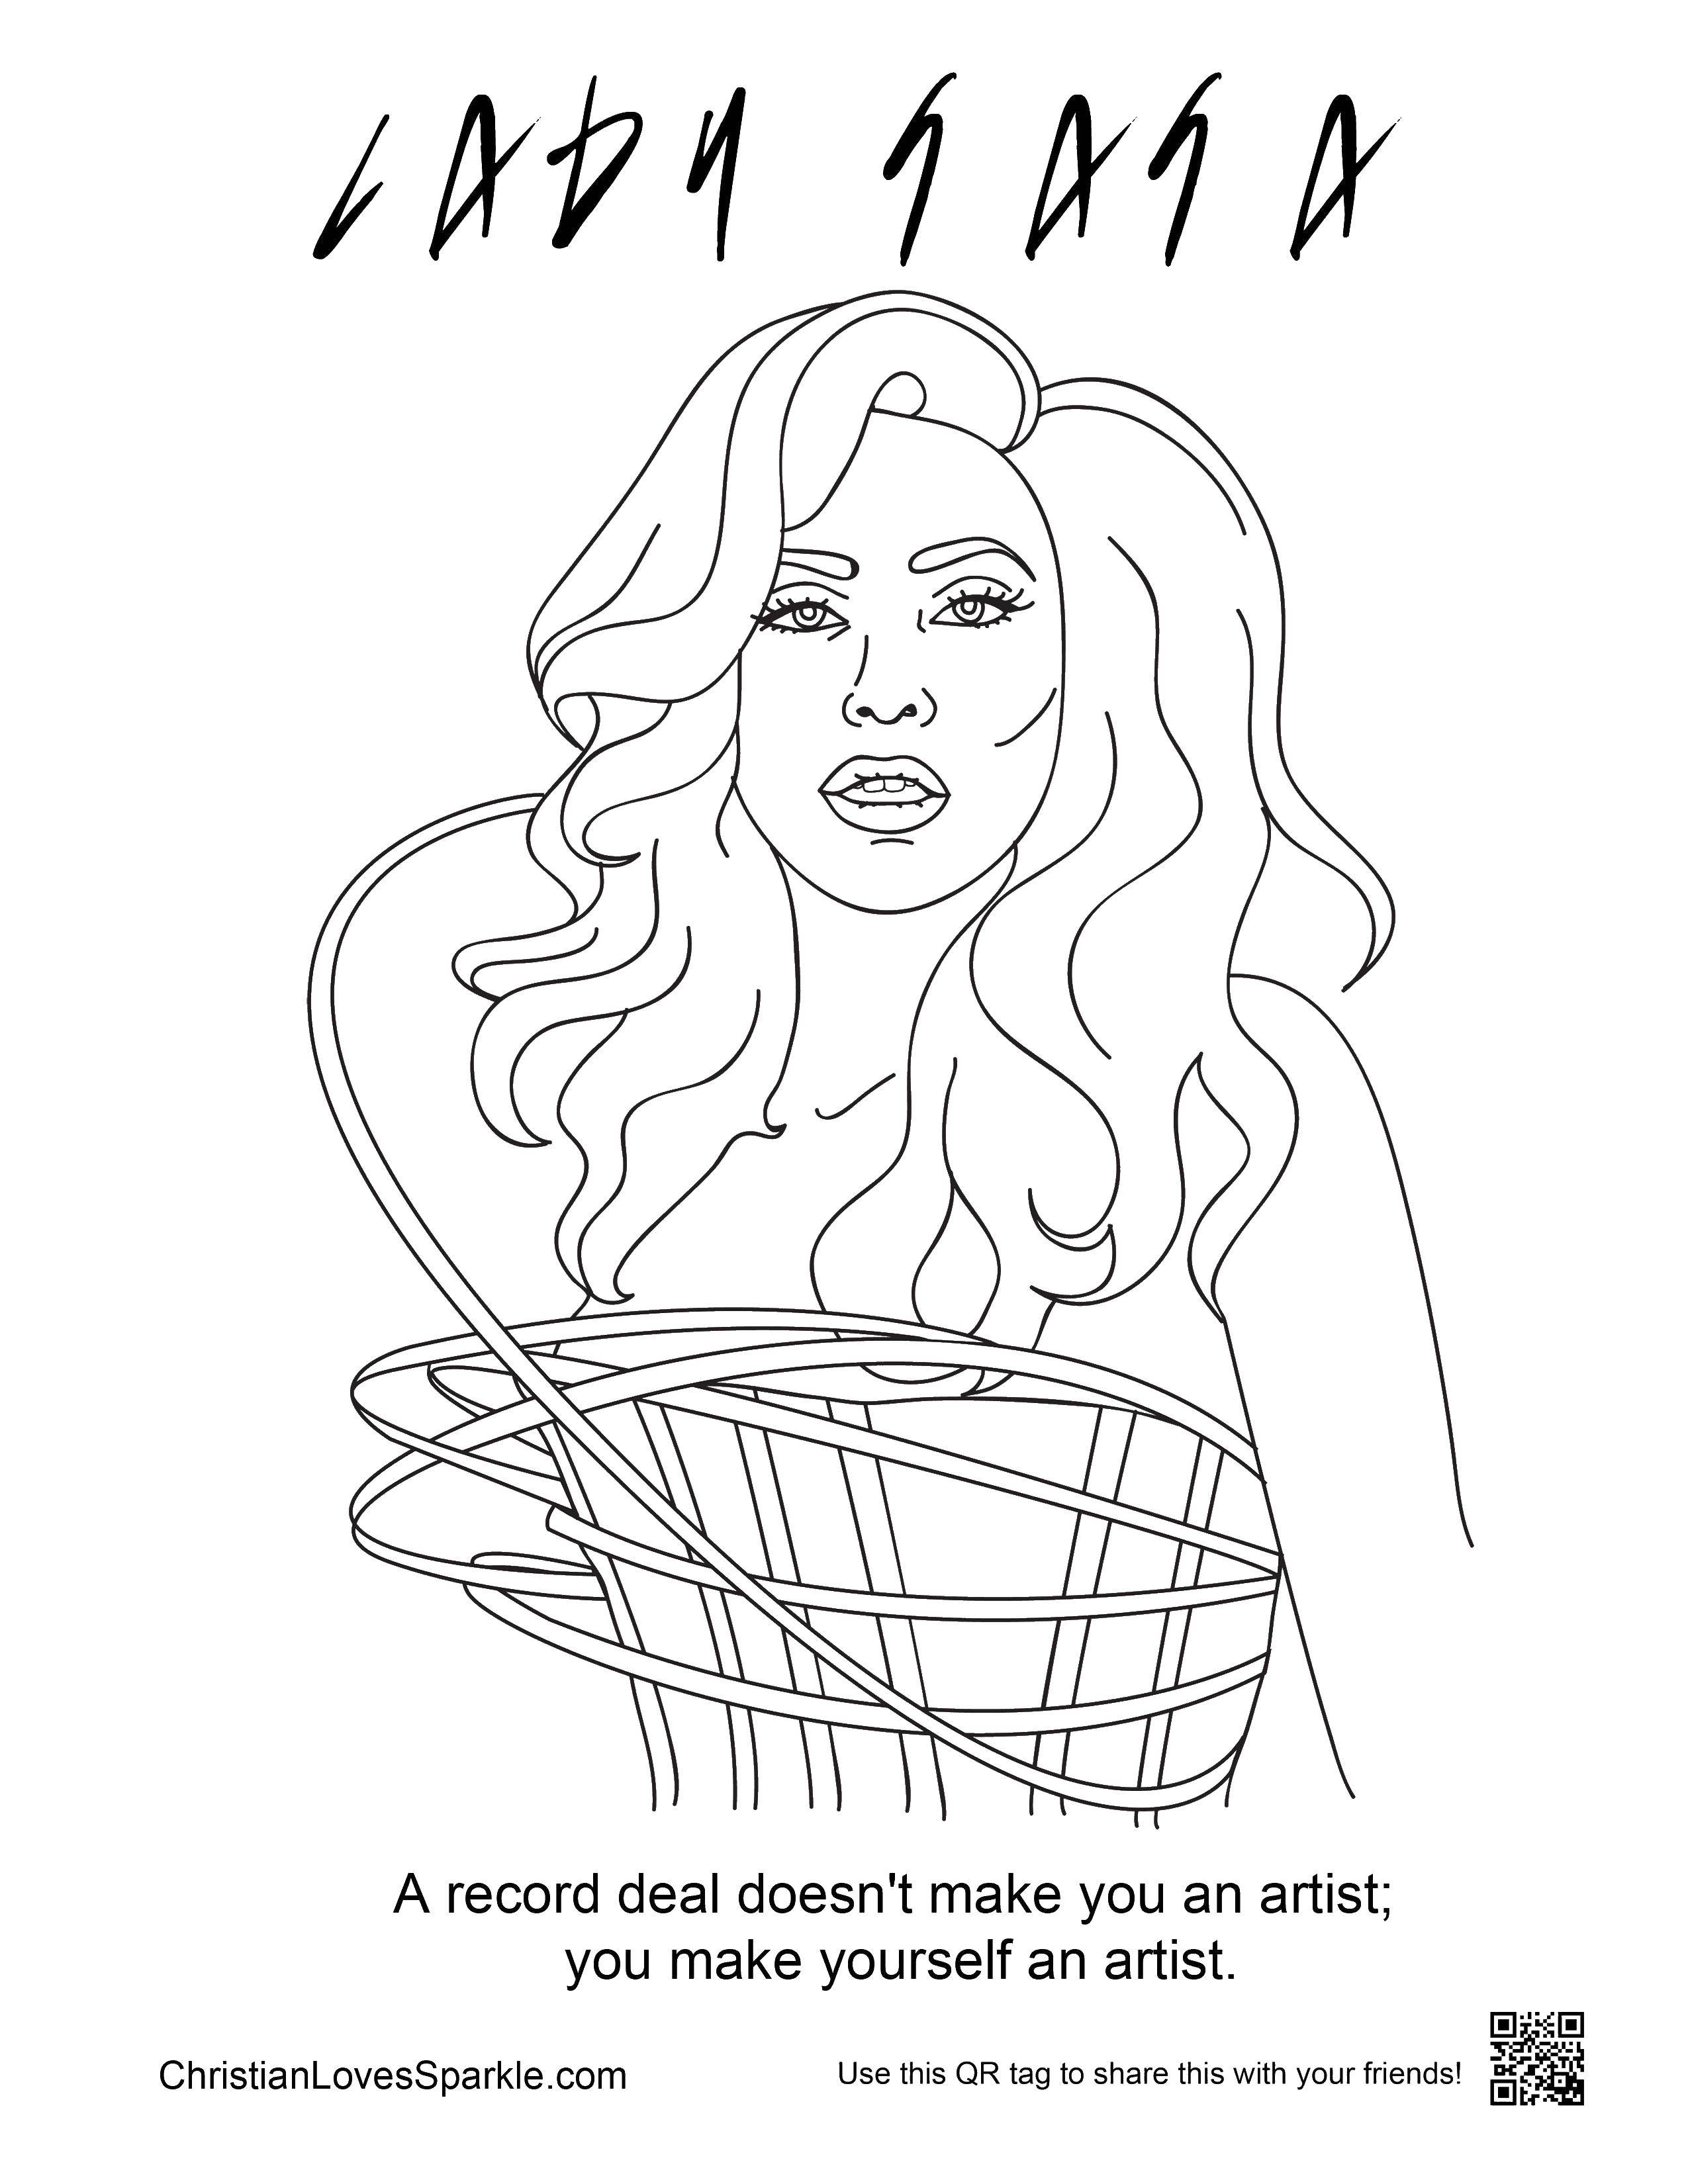 Coloring Lady Gaga. Category coloring pages for girls. Tags:  for girls ladies, lady Gaga.